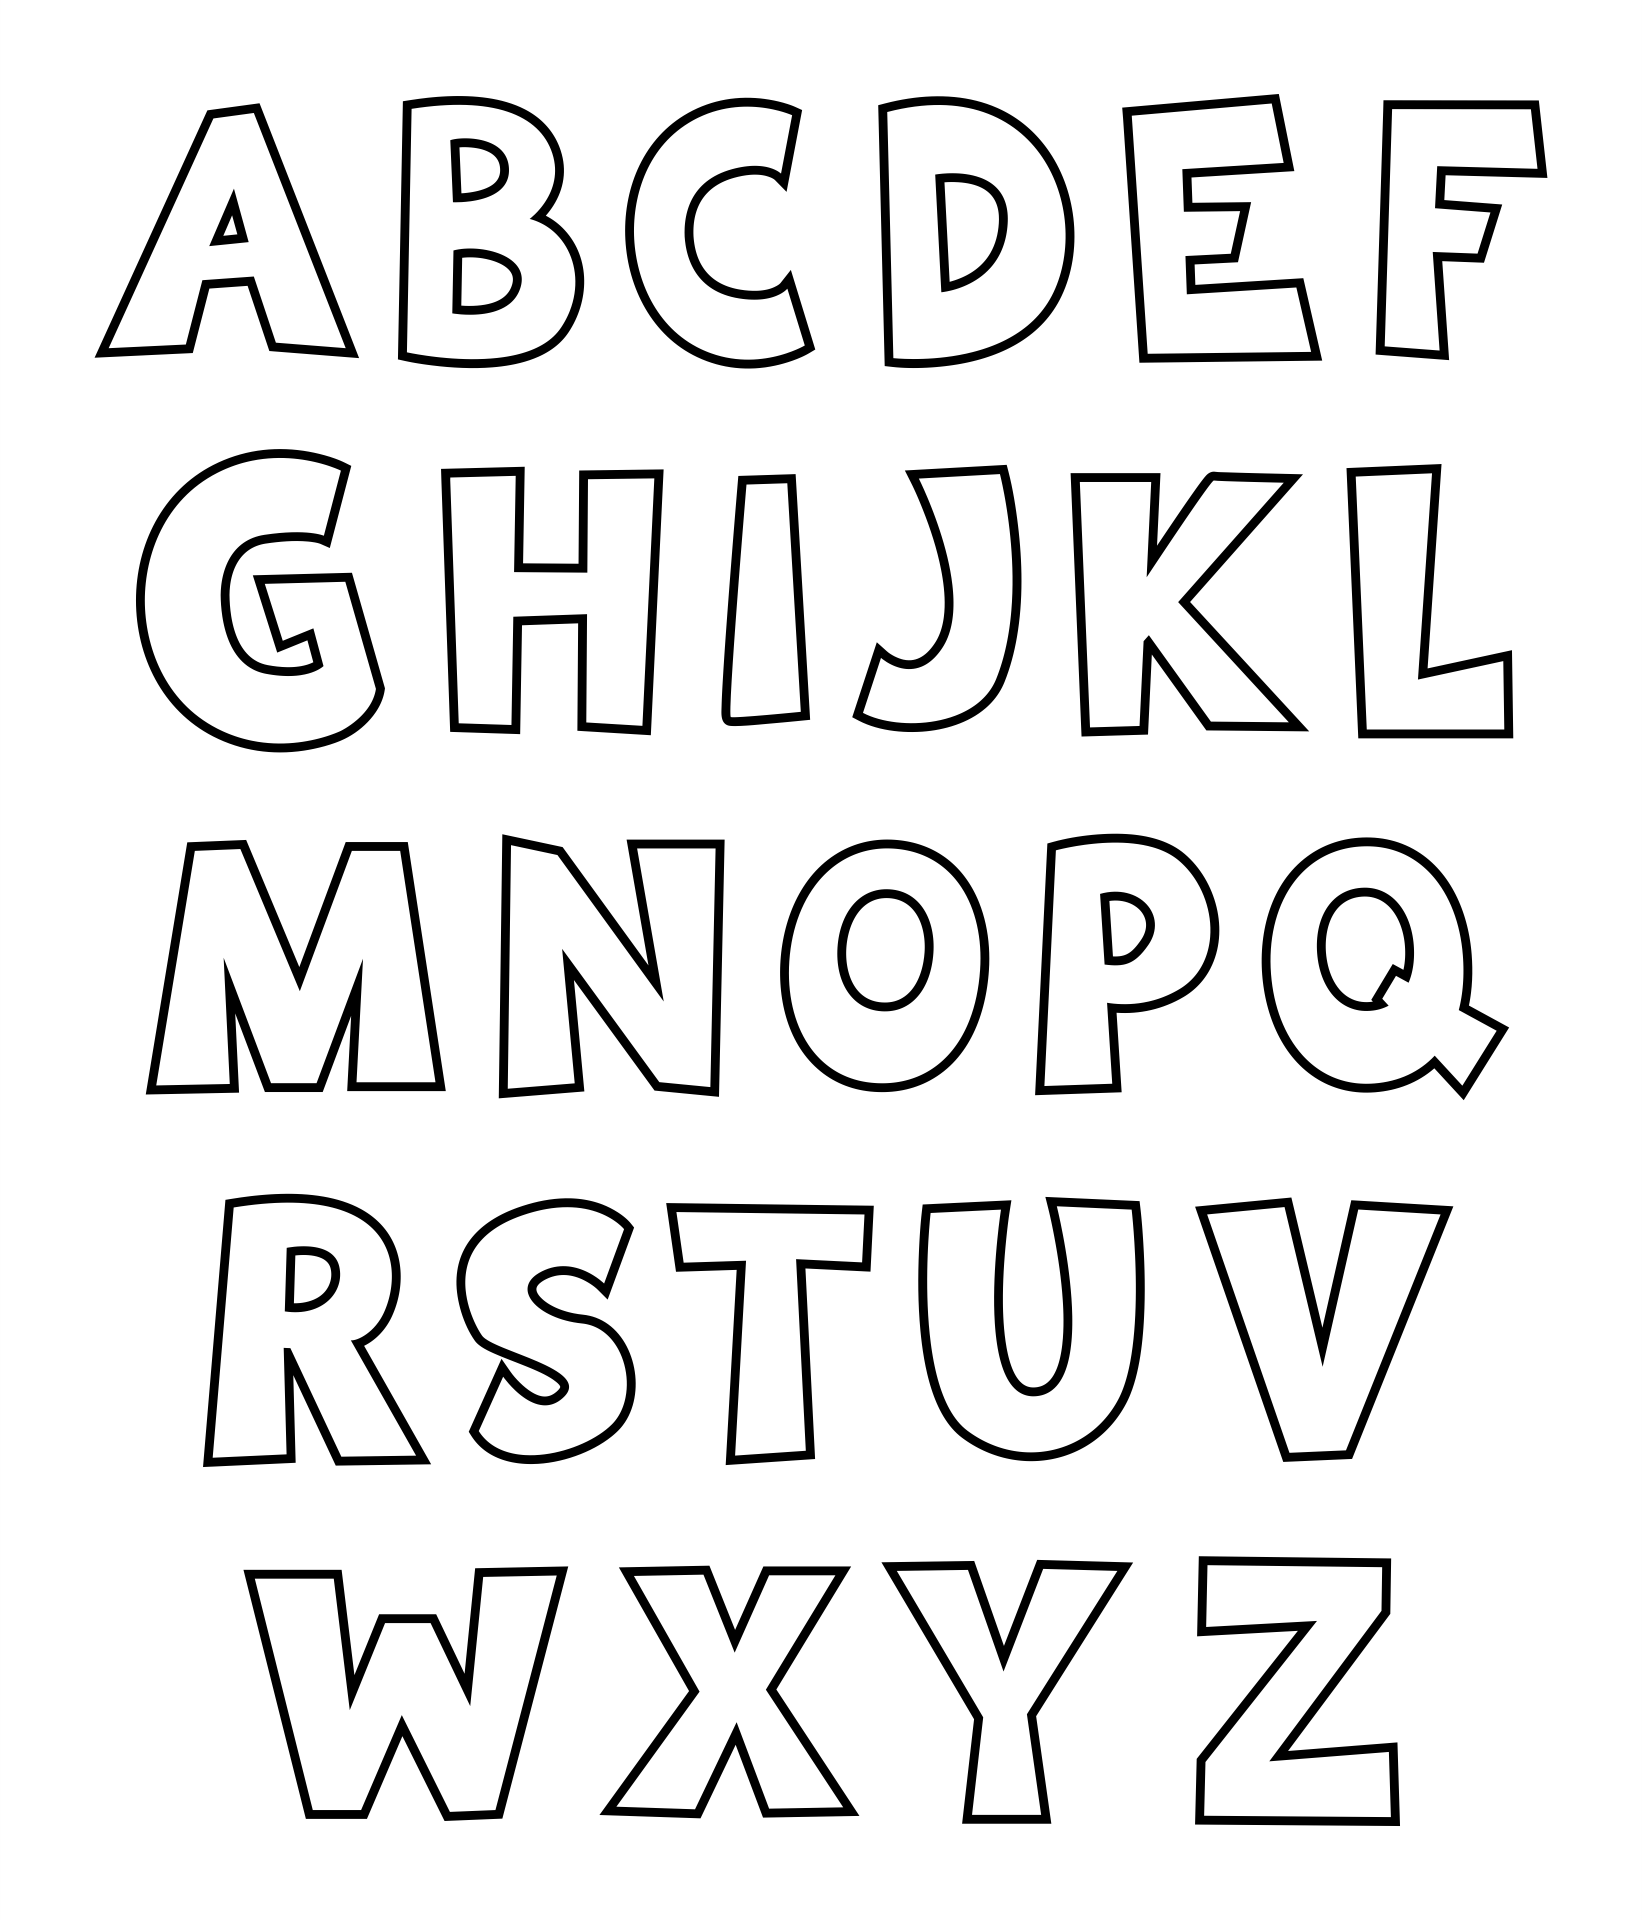 5 Best Images of Printable Alphabet Outlines Printable Alphabet